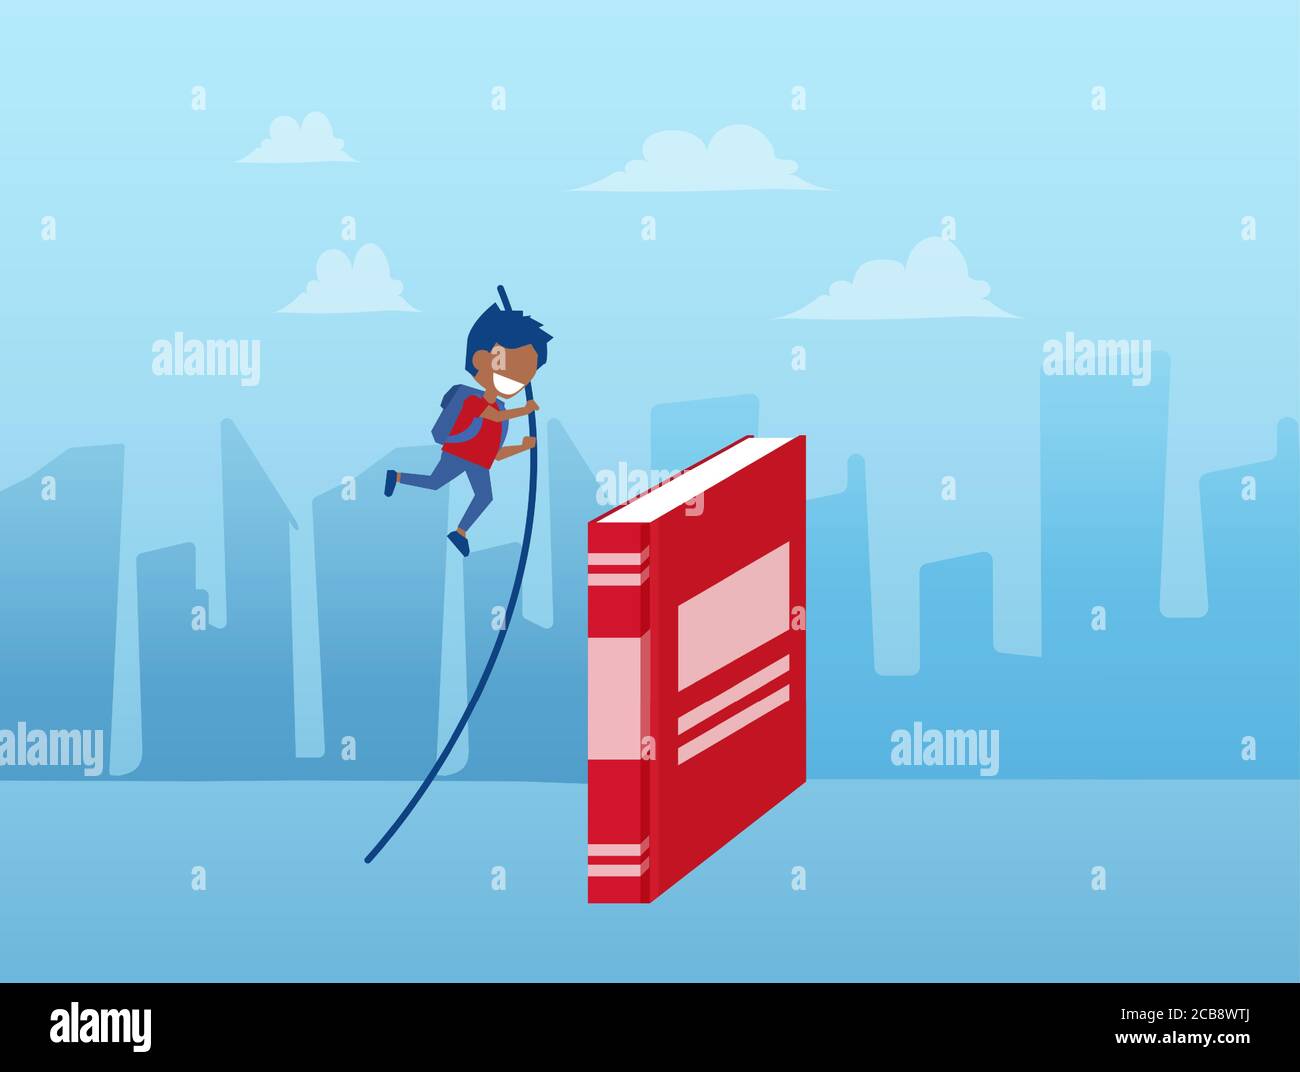 Vector of a child pole vaulting over the book on a cityscape background Stock Vector